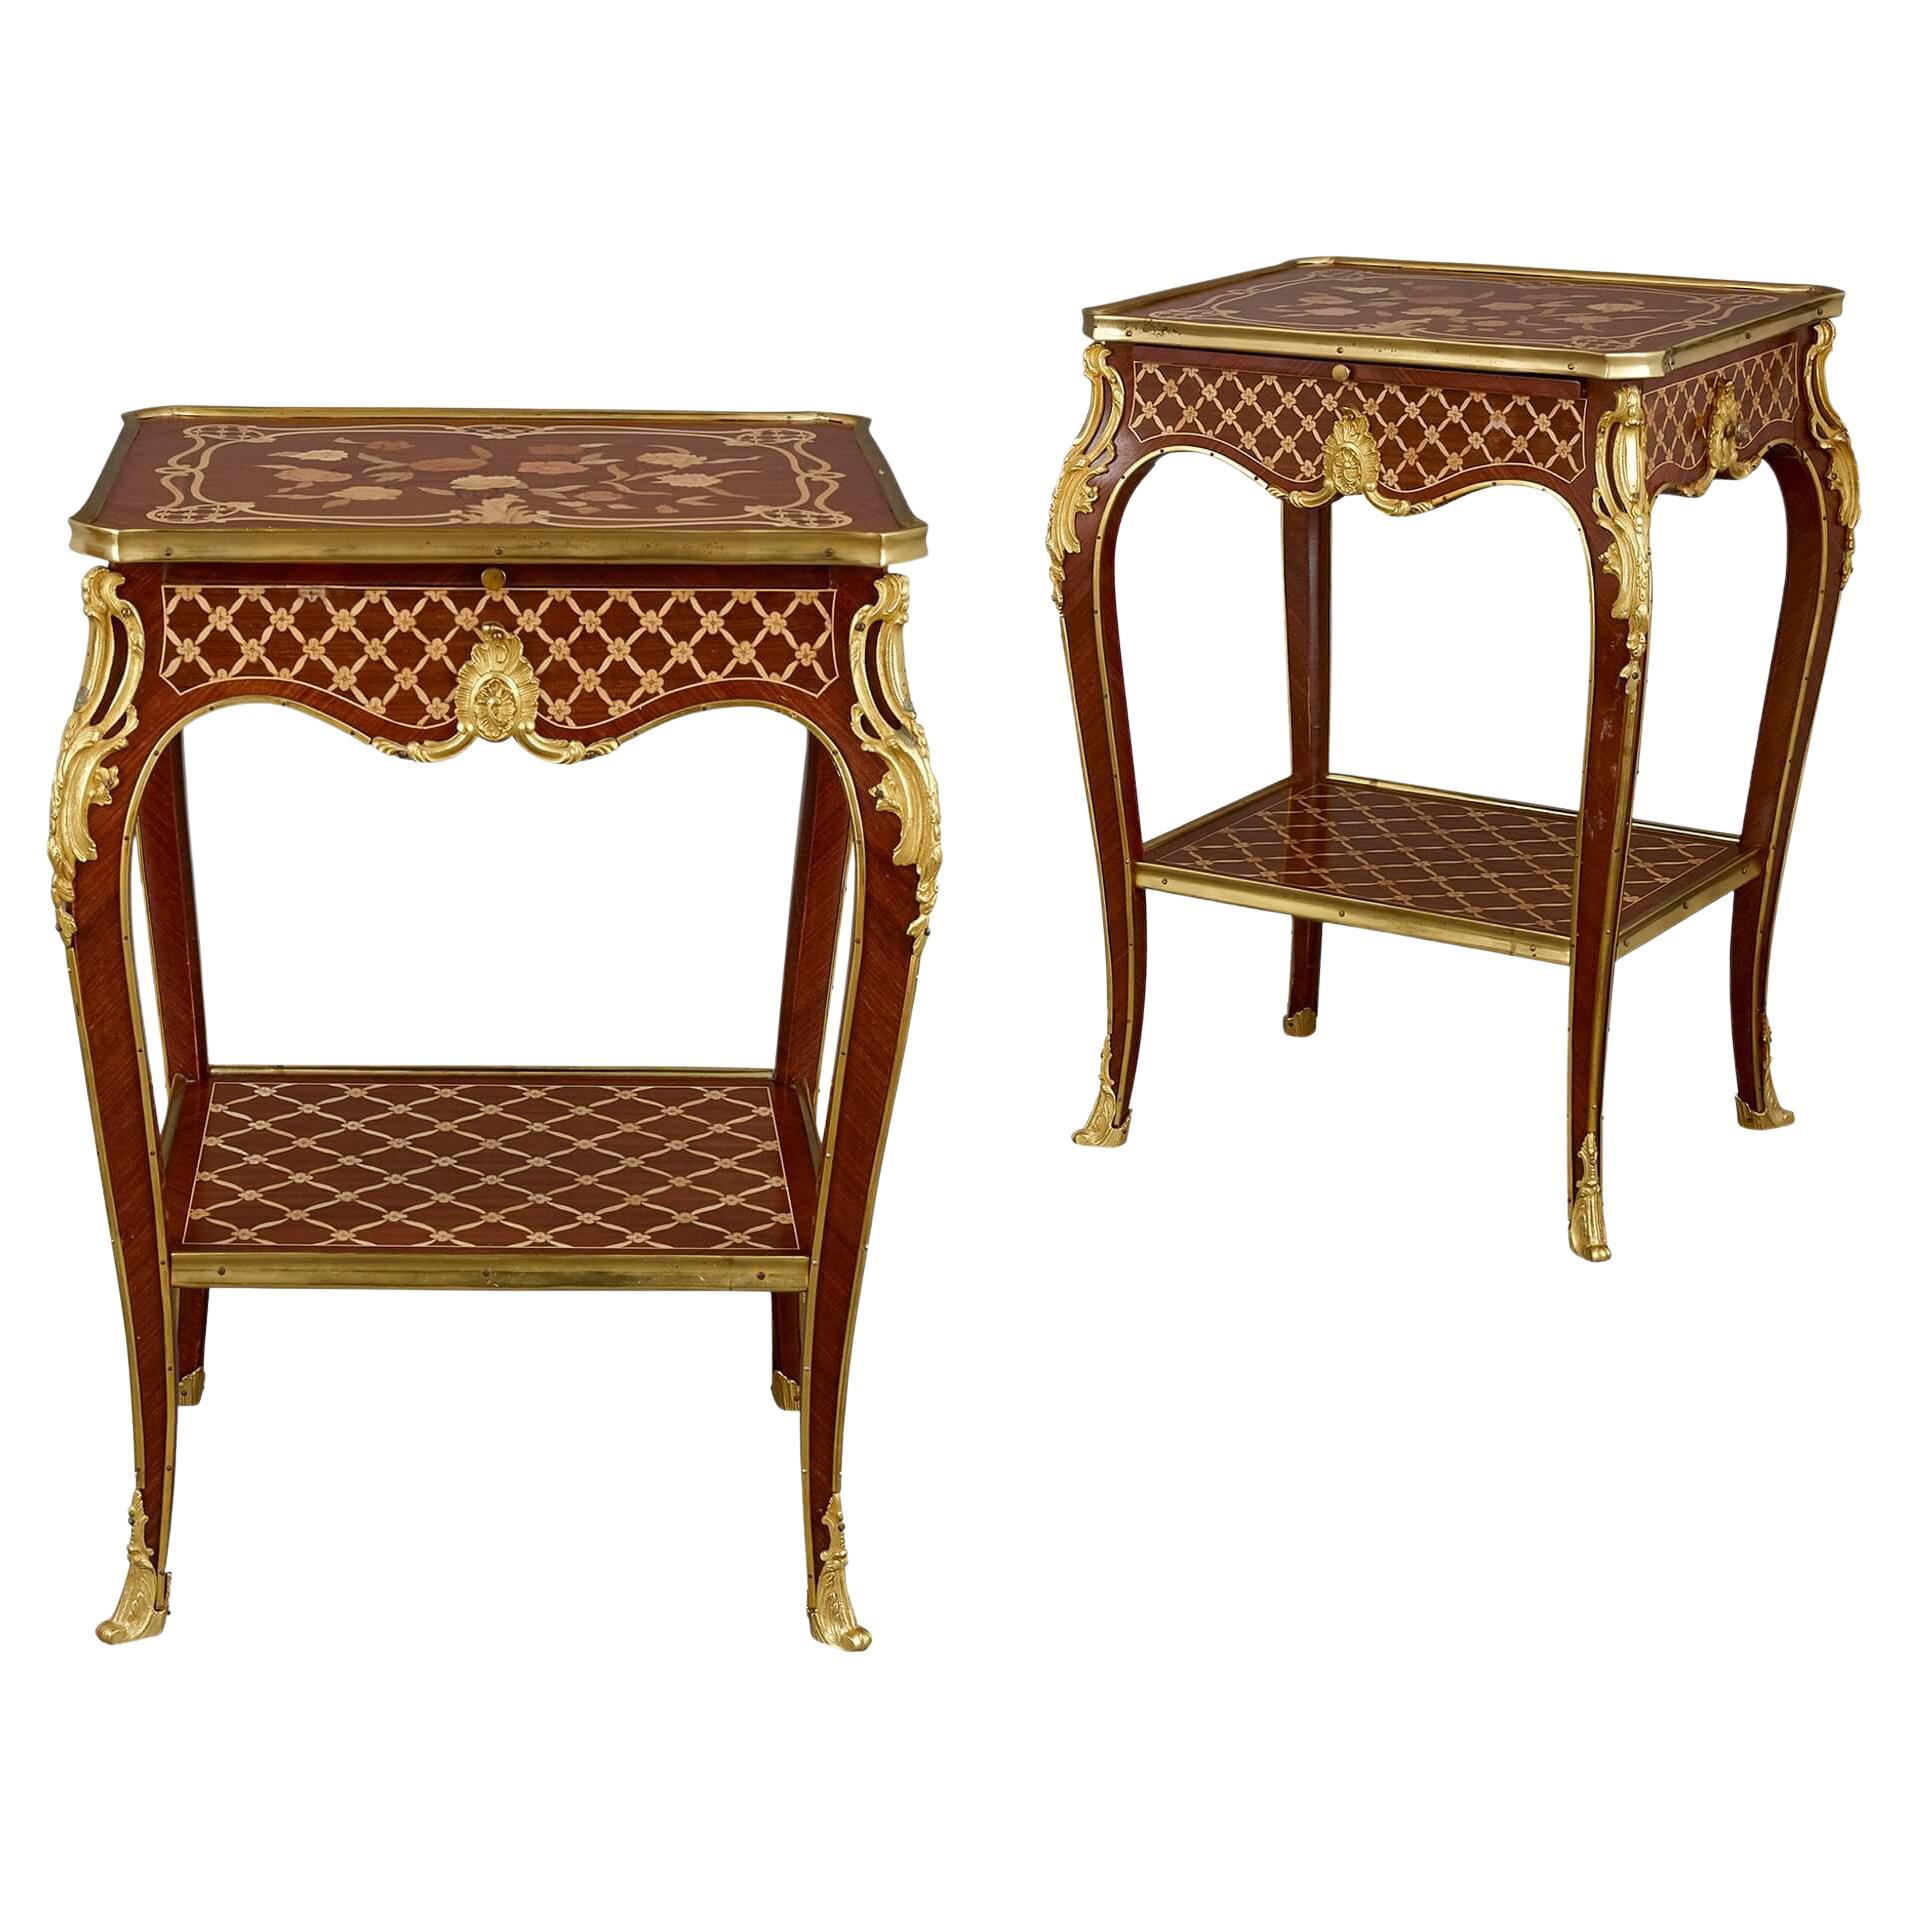 Pair of Louis XV Style Ormolu Mounted Marquetry and Parquetry Side Tables